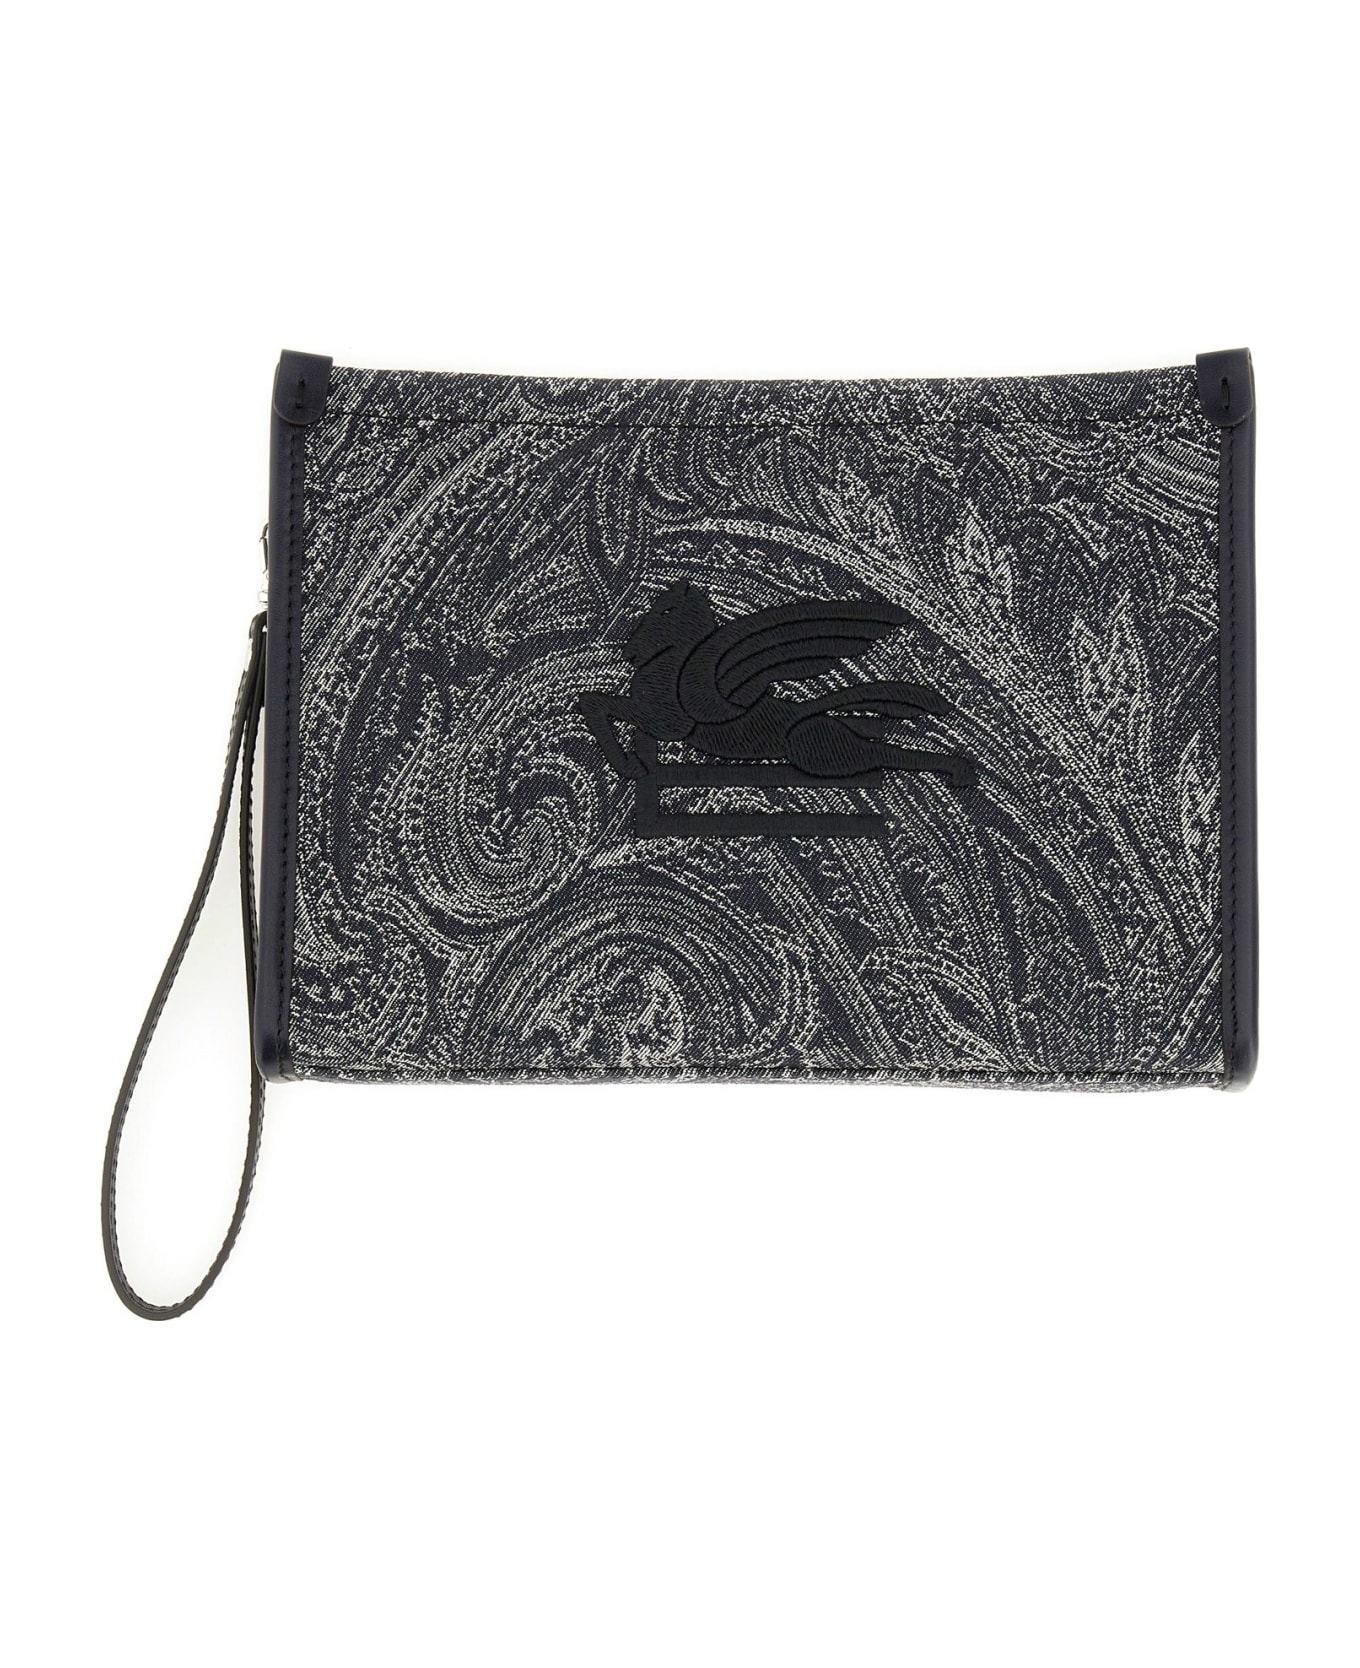 Etro Navy Blue Pouch With Paisley Jacquard Motif - Blue クラッチバッグ